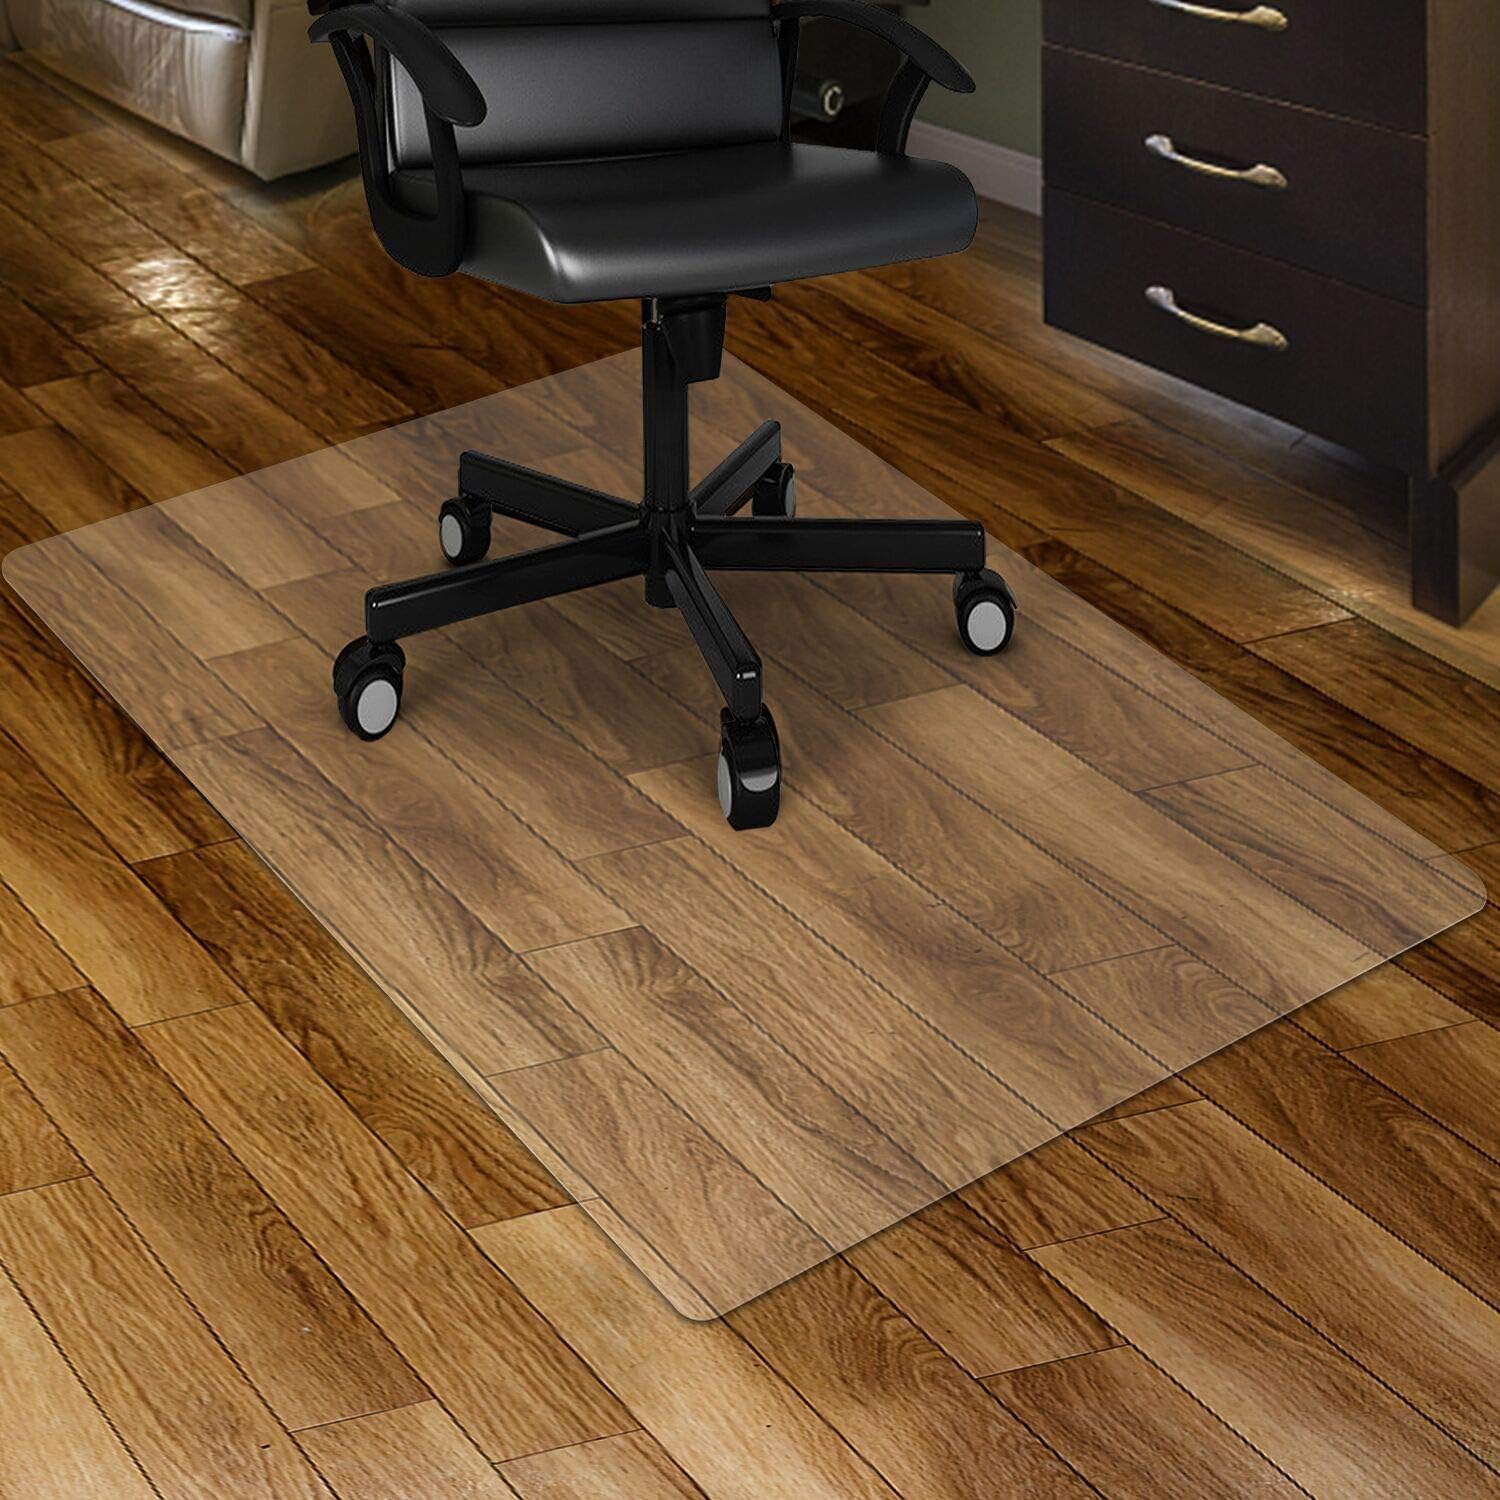 Amazon.com : Kuyal Clear Chair mat for Hardwood Floor 30 x 48 inches Transparent Floor Mats Wood/Tile Protection Mat for Office  Home (30 X 48 Rectangle) : Office Products